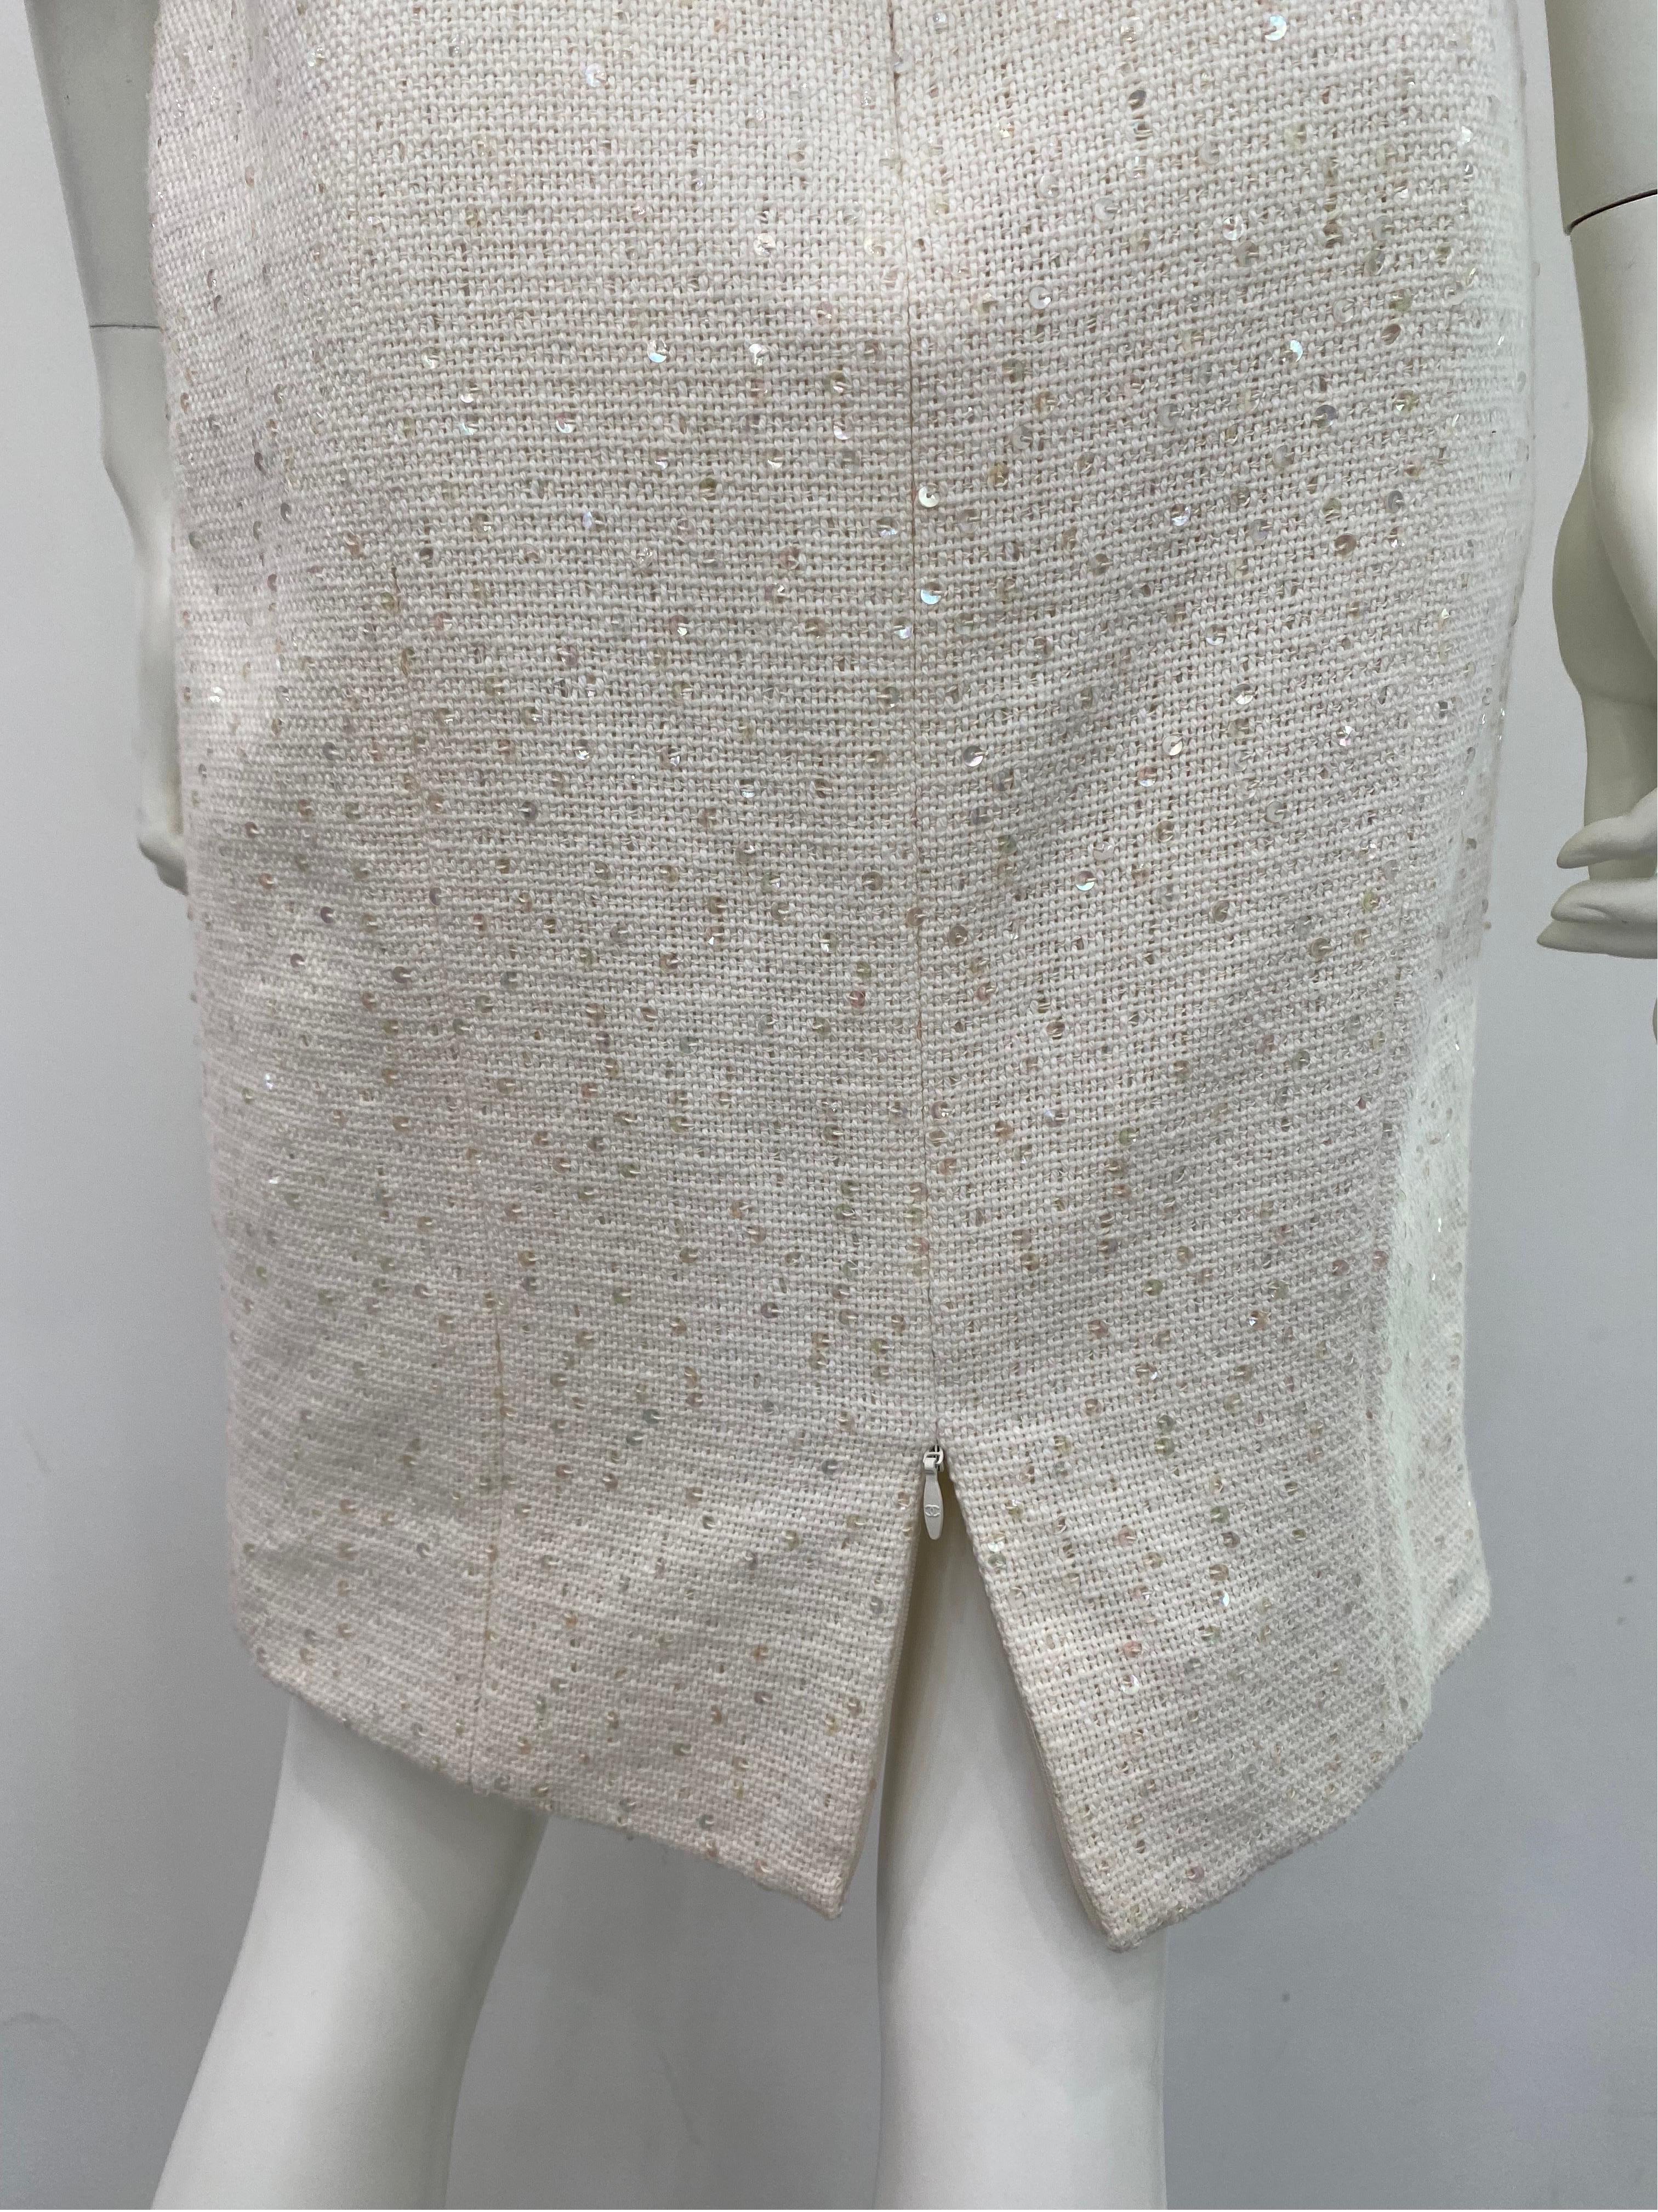 Chanel Runway 2012P Cream Cotton Embellished Strapless Dress with Jacket-Sz 40  For Sale 4